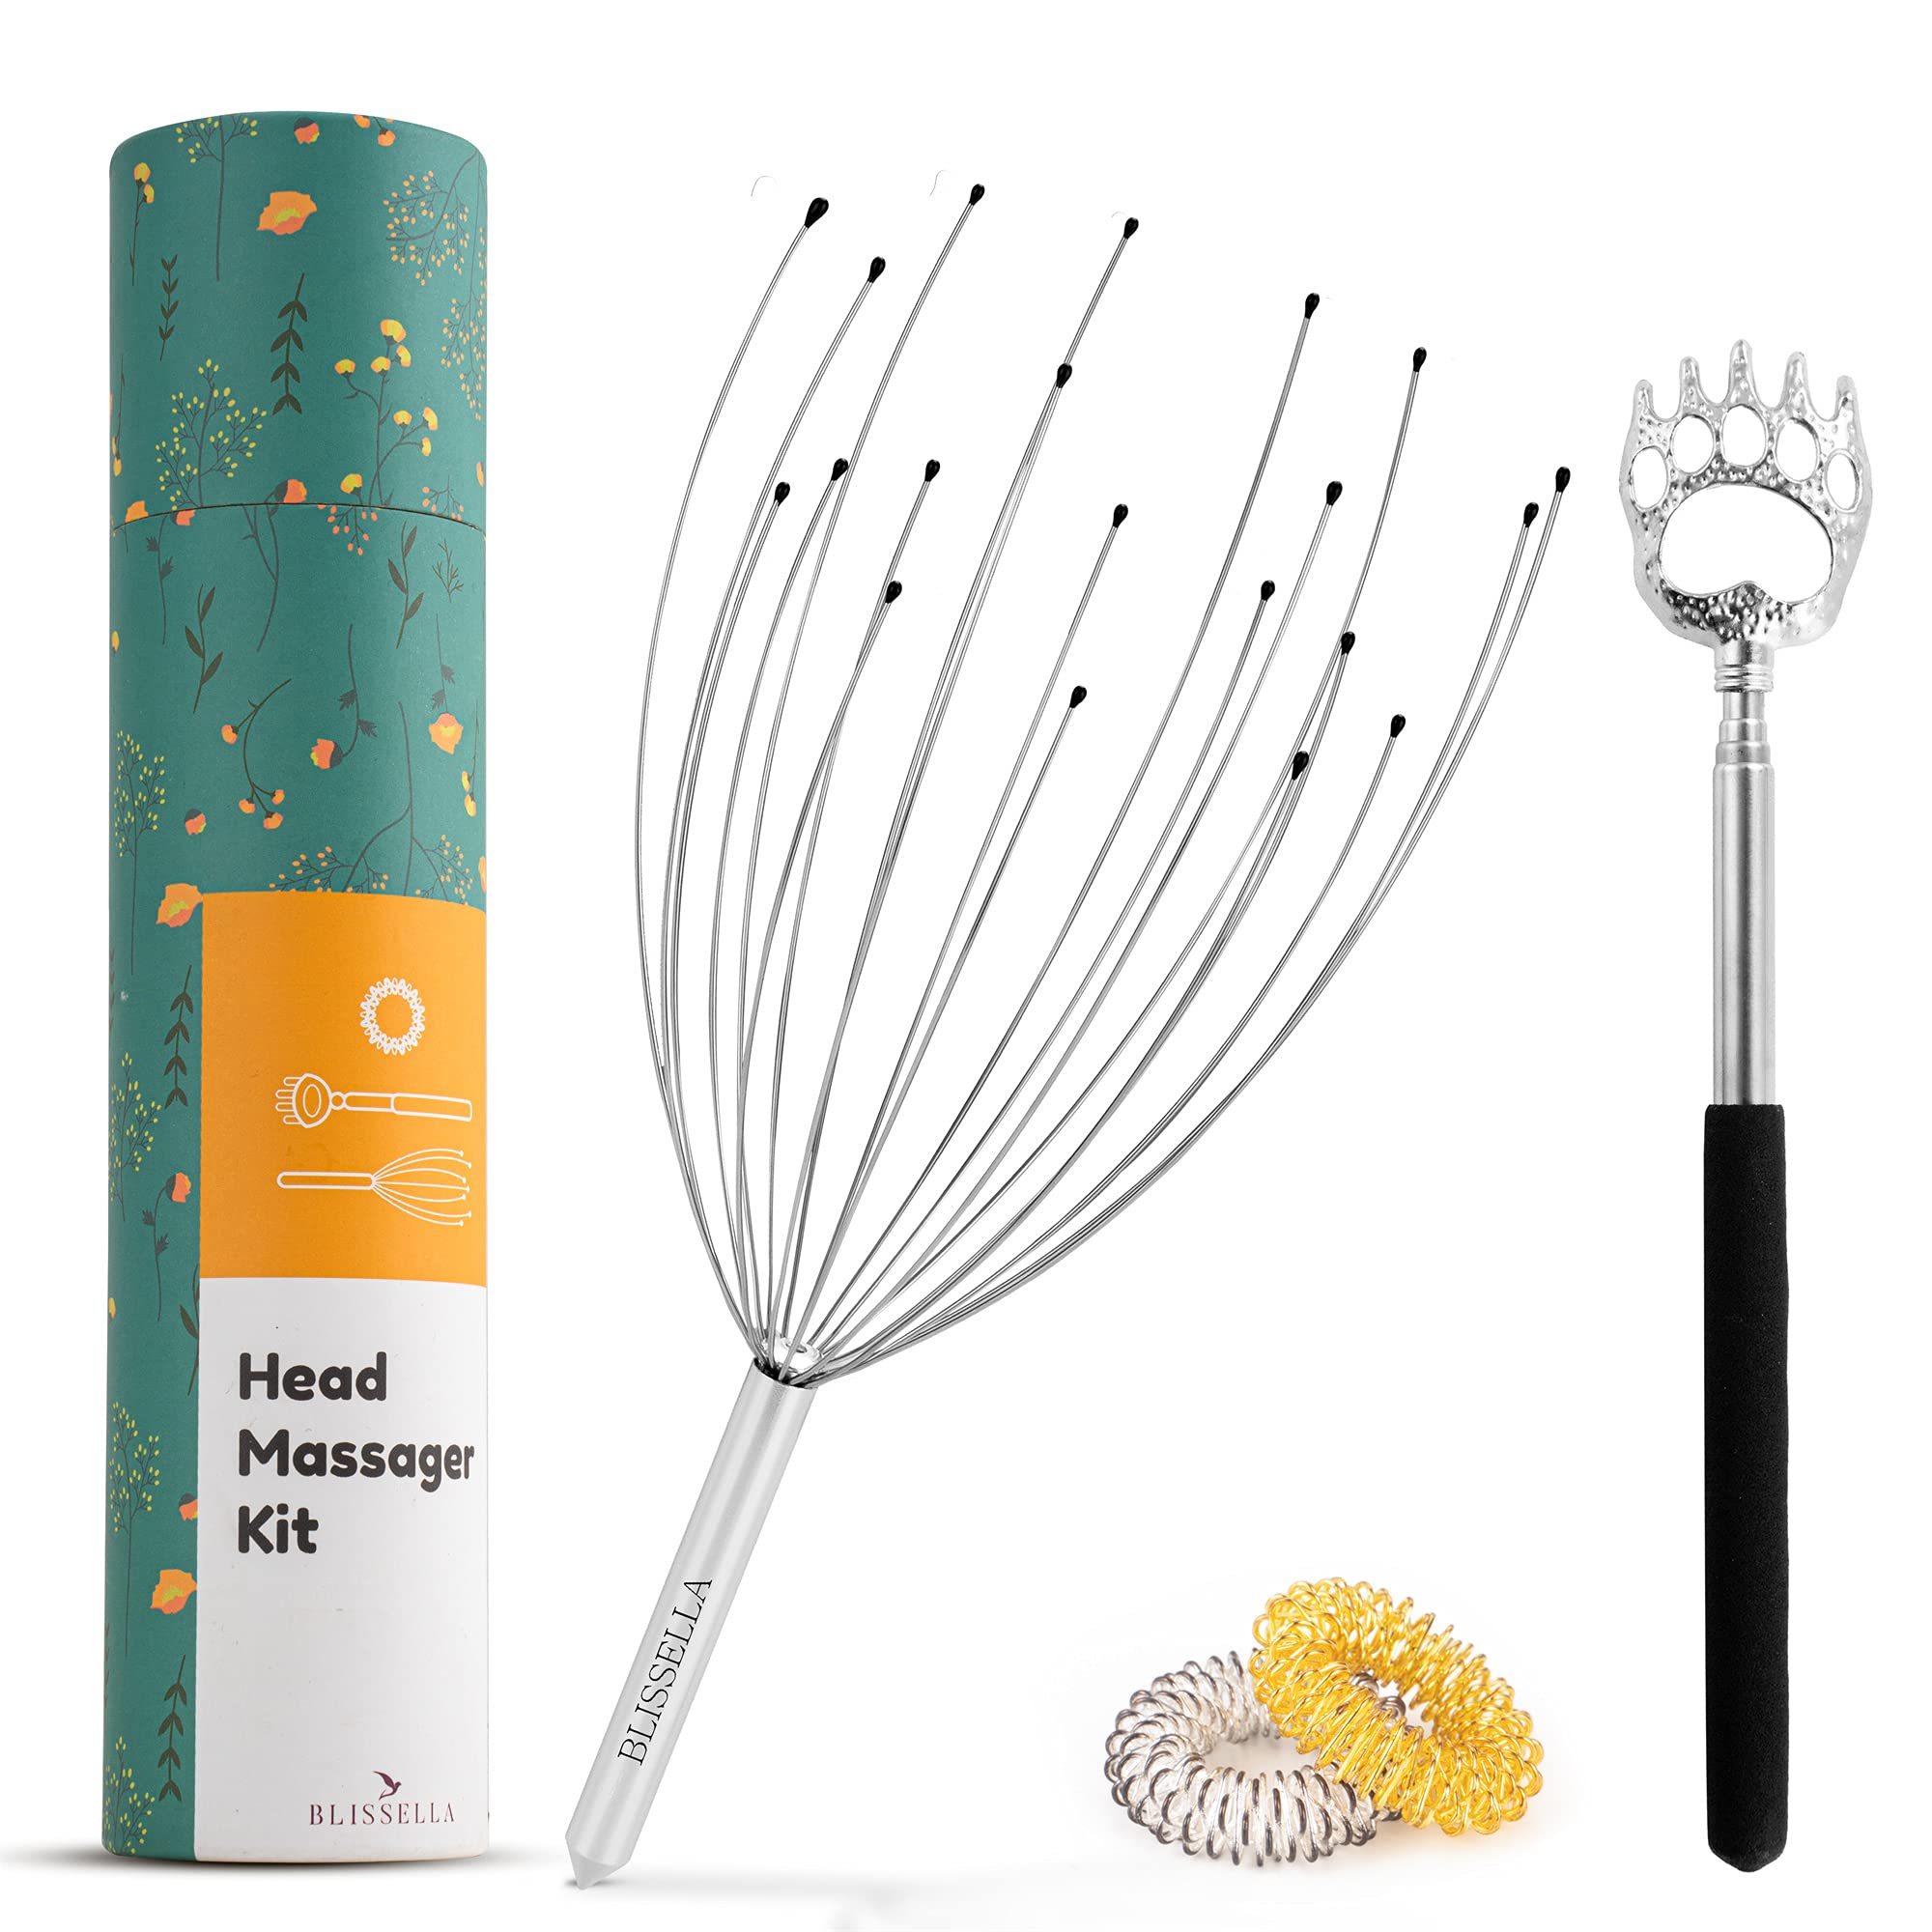 Blissella Head Massager Scalp with Extendable Back Scratcher & Finger Massage Rings-Head Massager for Hair Growth-Deep Relaxation Tool with 20 Fingers for Stress Relief and Head Pressure